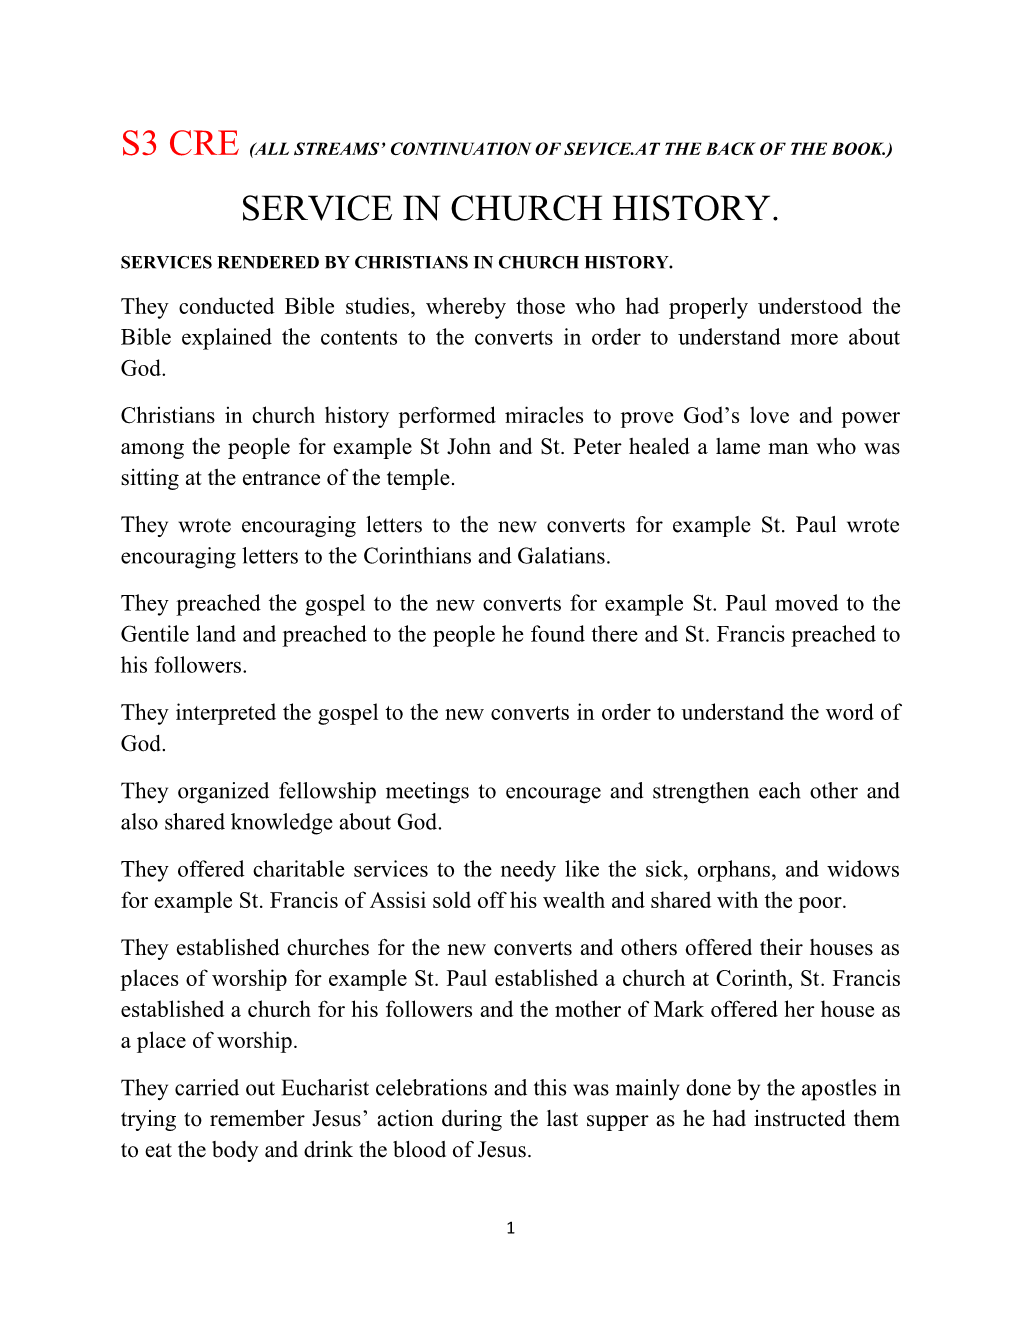 Service in Church History